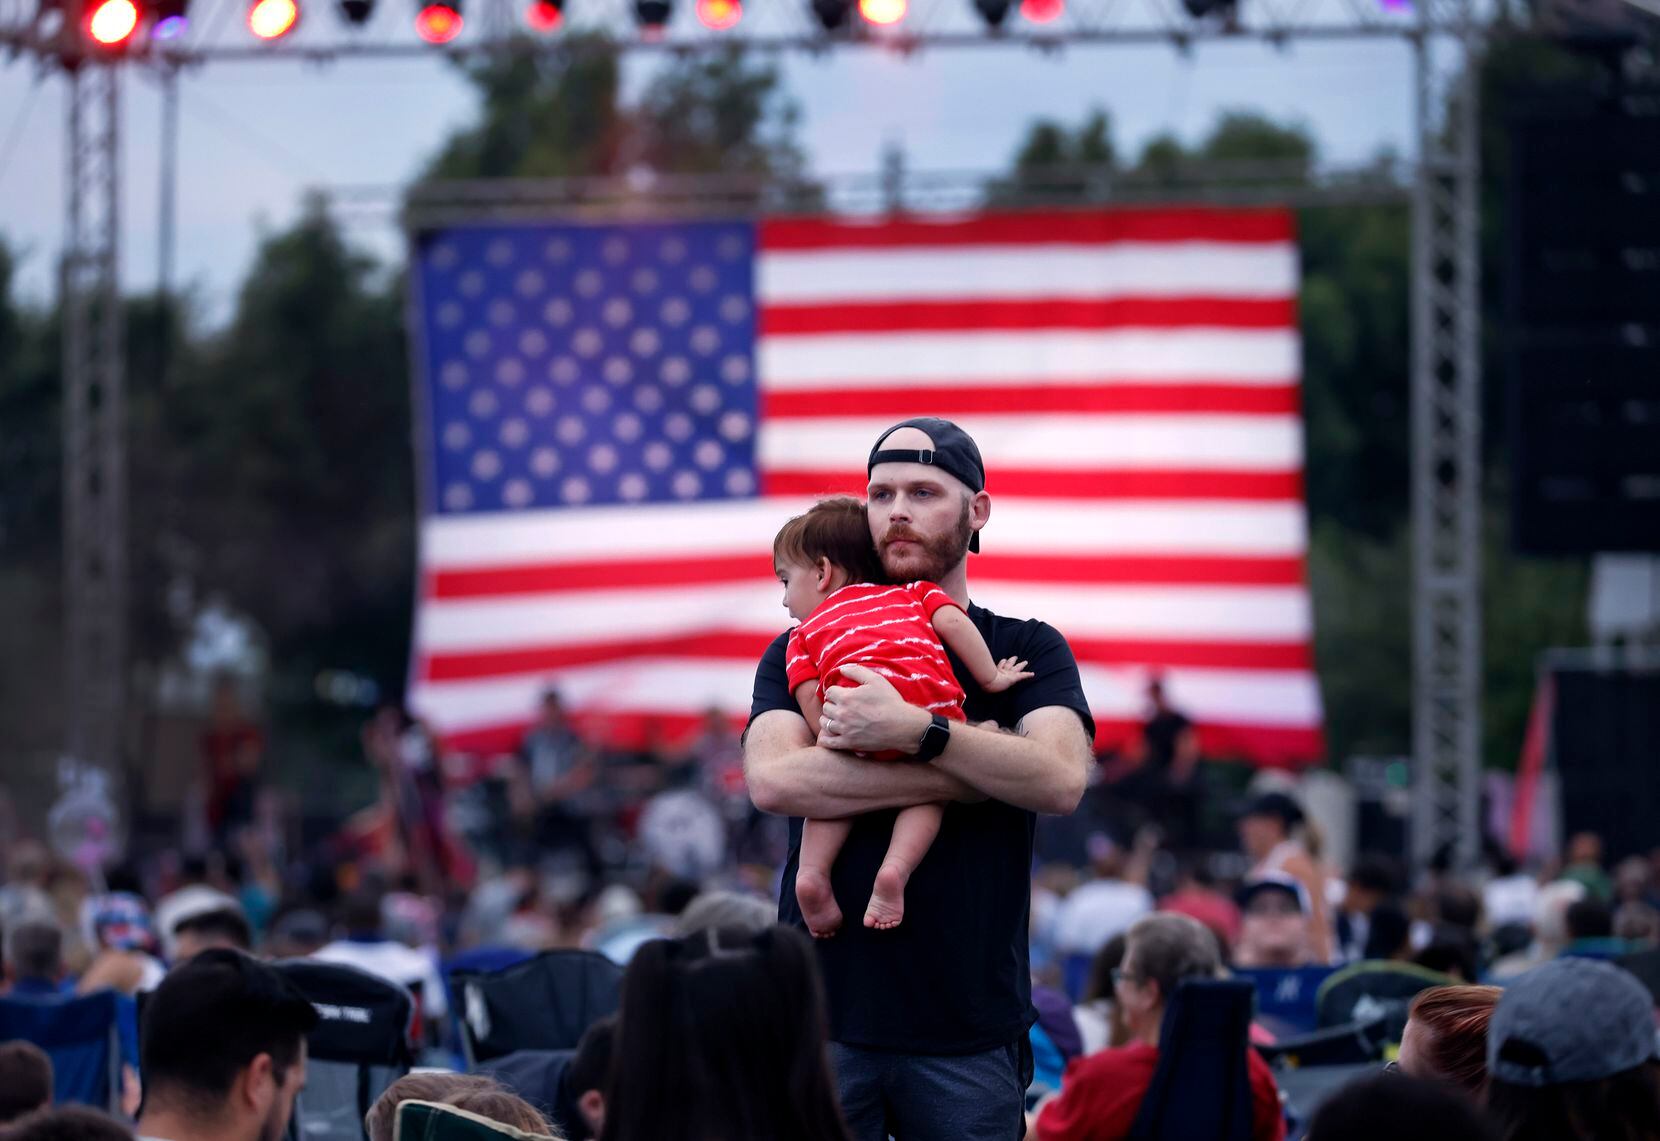 Nick Schmidt of Farmers Branch rocked his son Ezra during the Addison Kaboom Town Fourth of July celebration.